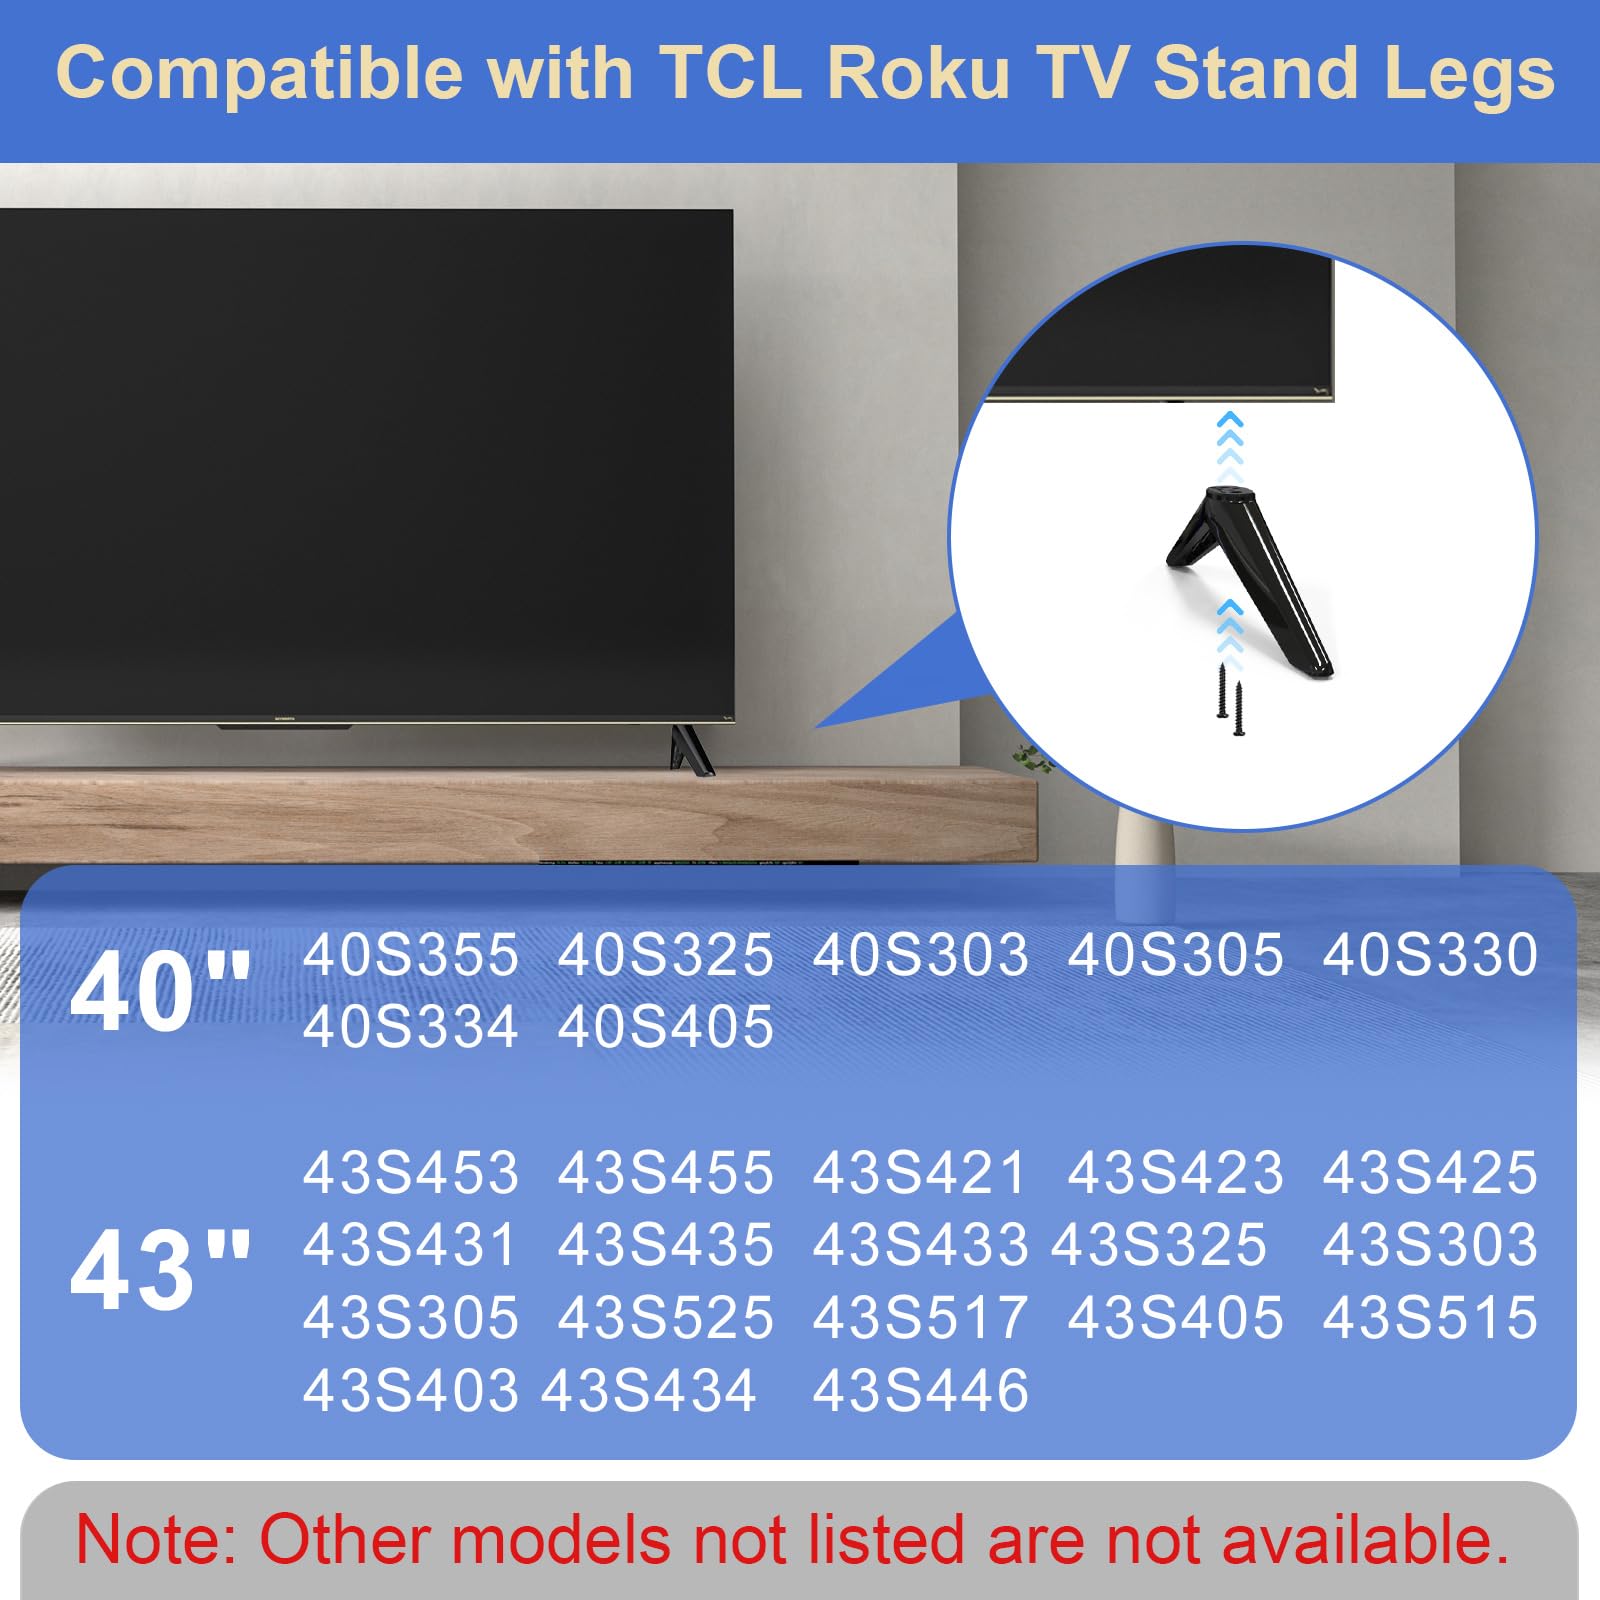 TV Legs for 40" 43" TCL Roku TV Stand Legs, Base Stand for TCL TV Stand 40S355 40S325 40S303 40S305 43S455 43S425 43S423 43S515 43S325 43S305 43S431 with Screws Set & Instructions, Easy to Install